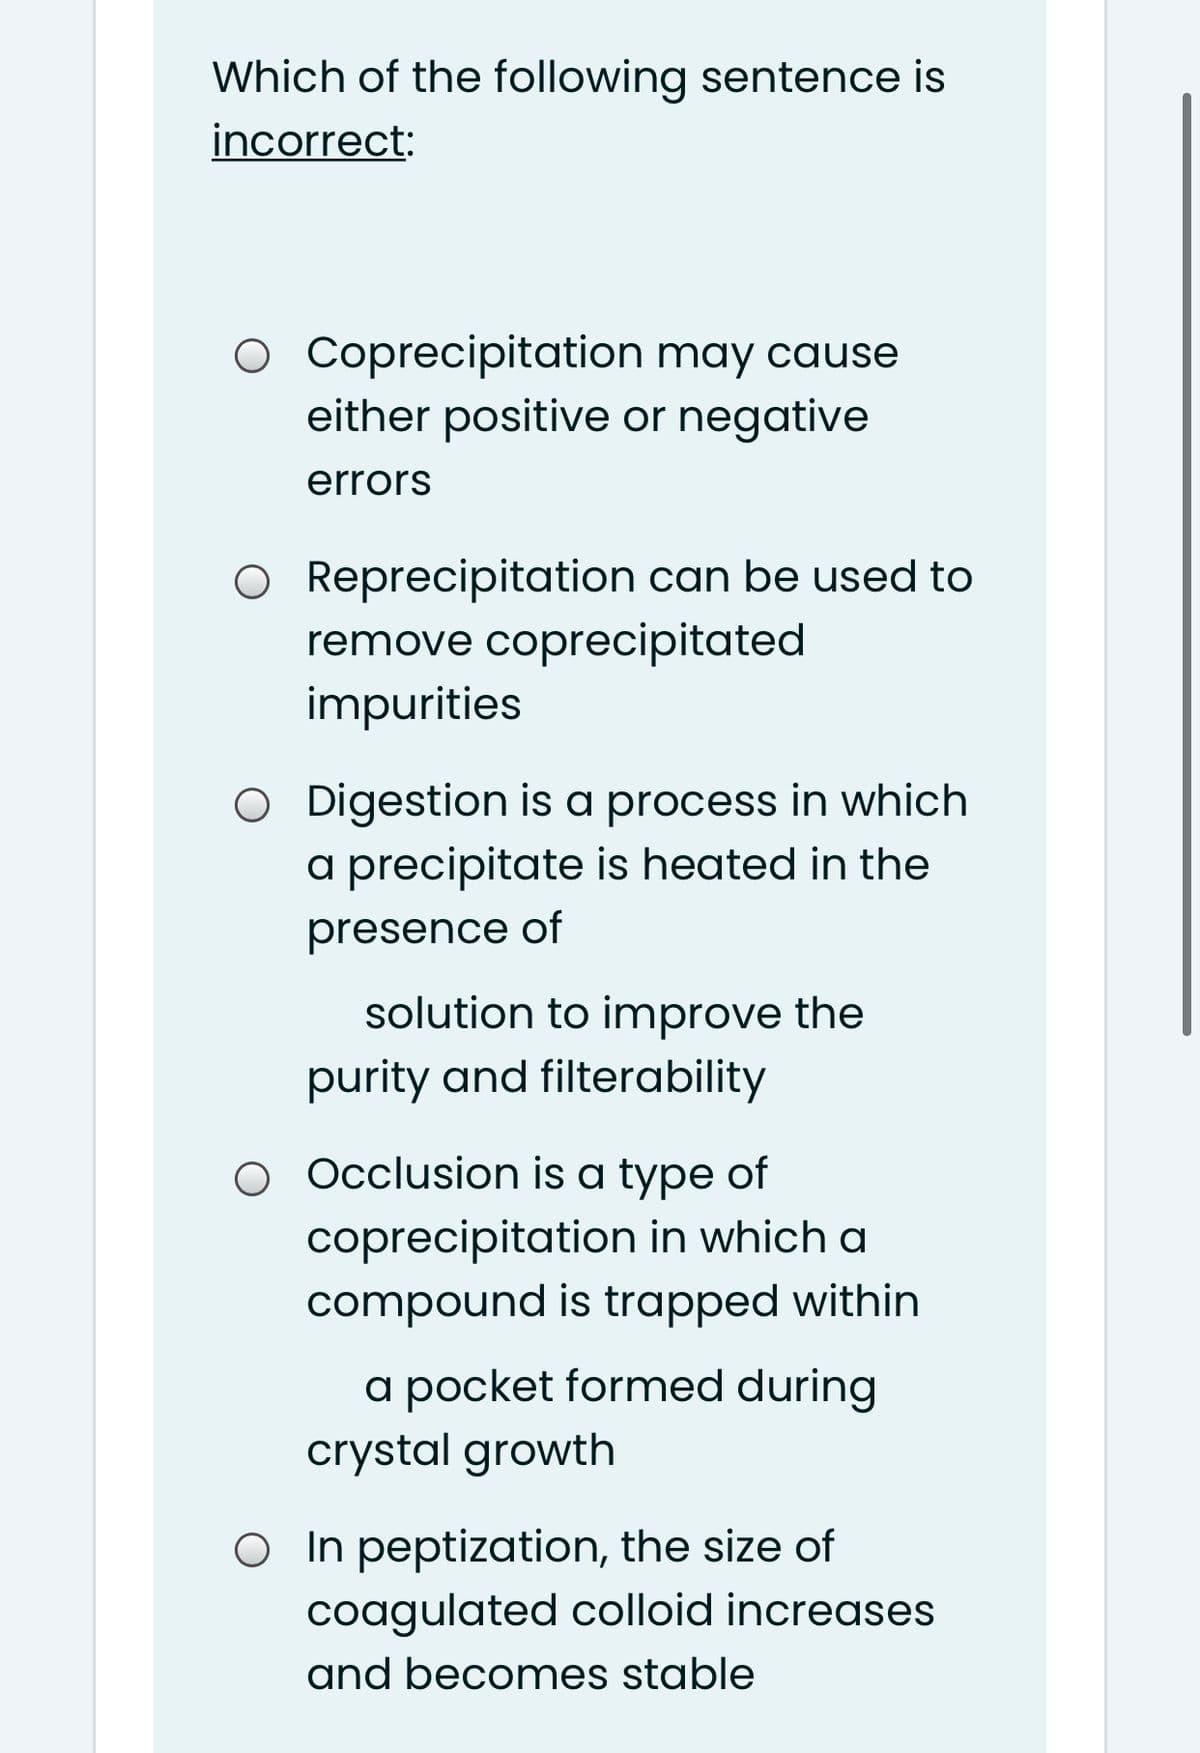 Which of the following sentence is
incorrect:
O Coprecipitation may cause
either positive or negative
errors
O Reprecipitation can be used to
remove coprecipitated
impurities
O Digestion is a process in which
a precipitate is heated in the
presence of
solution to improve the
purity and filterability
O Occlusion is a type of
coprecipitation in which a
compound is trapped within
a pocket formed during
crystal growth
O In peptization, the size of
coagulated colloid increases
and becomes stable
